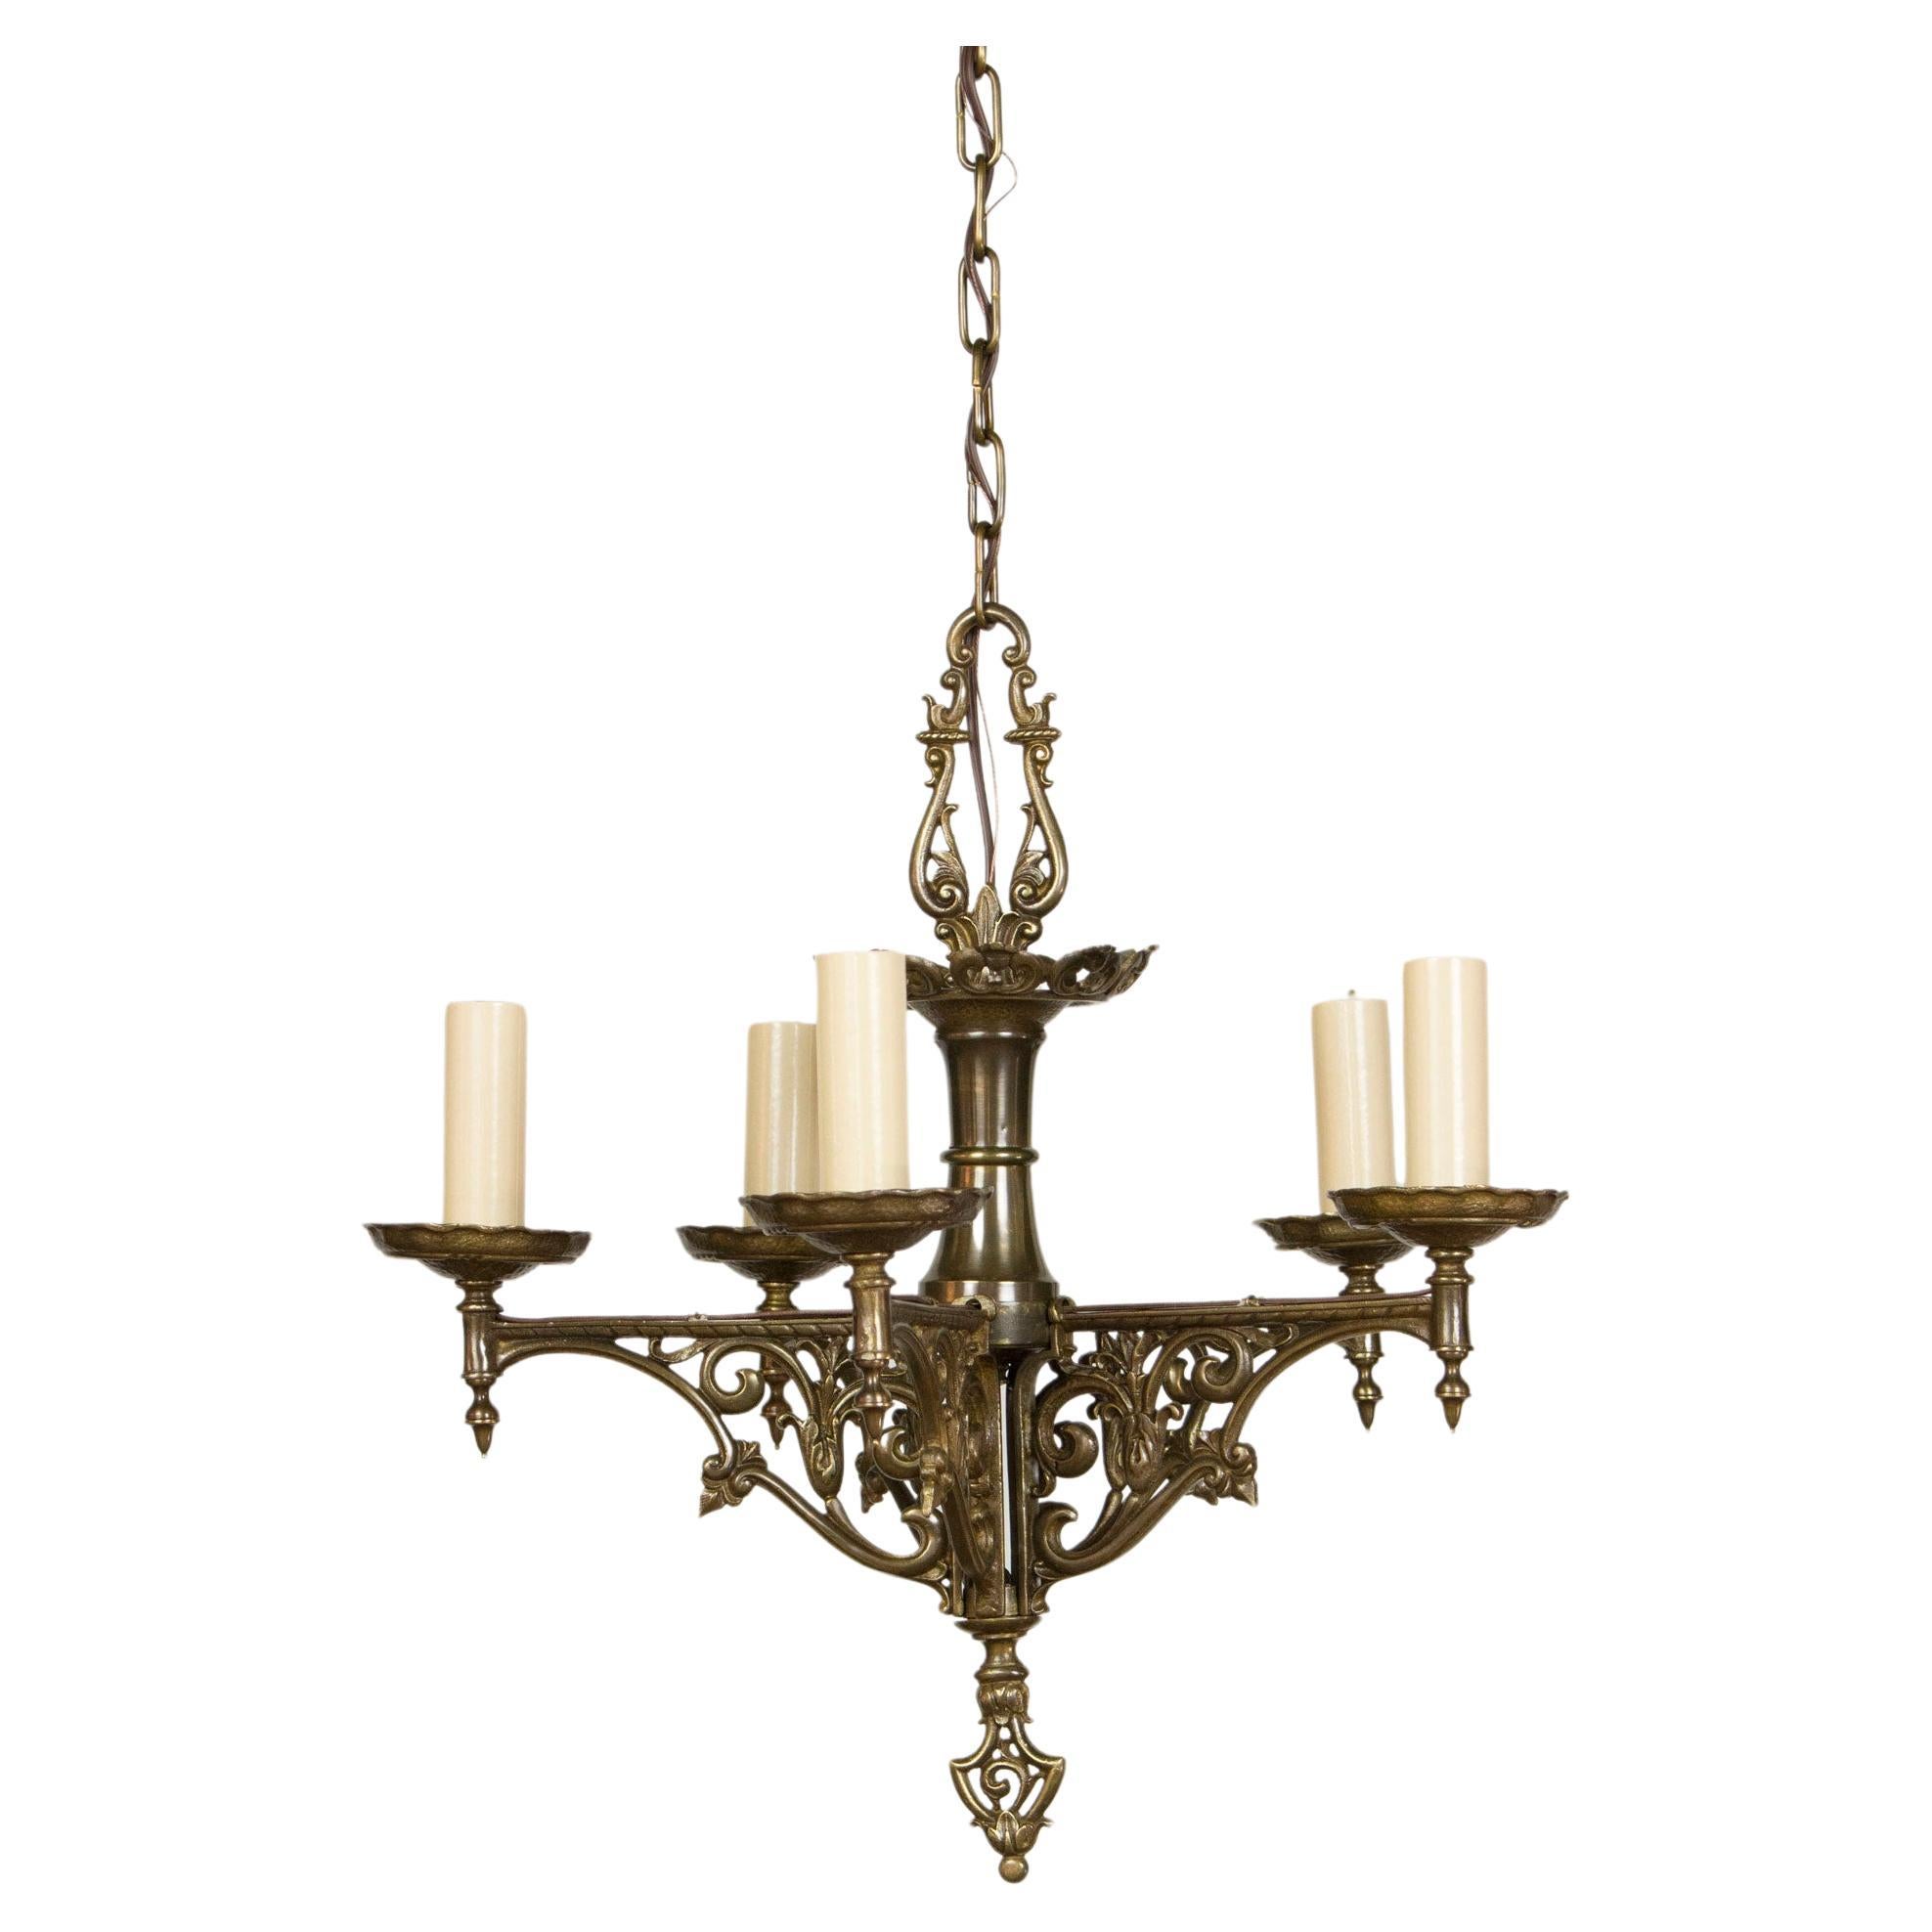 Early 20th Century Five Light Antique Brass Tudor Chandelier For Sale